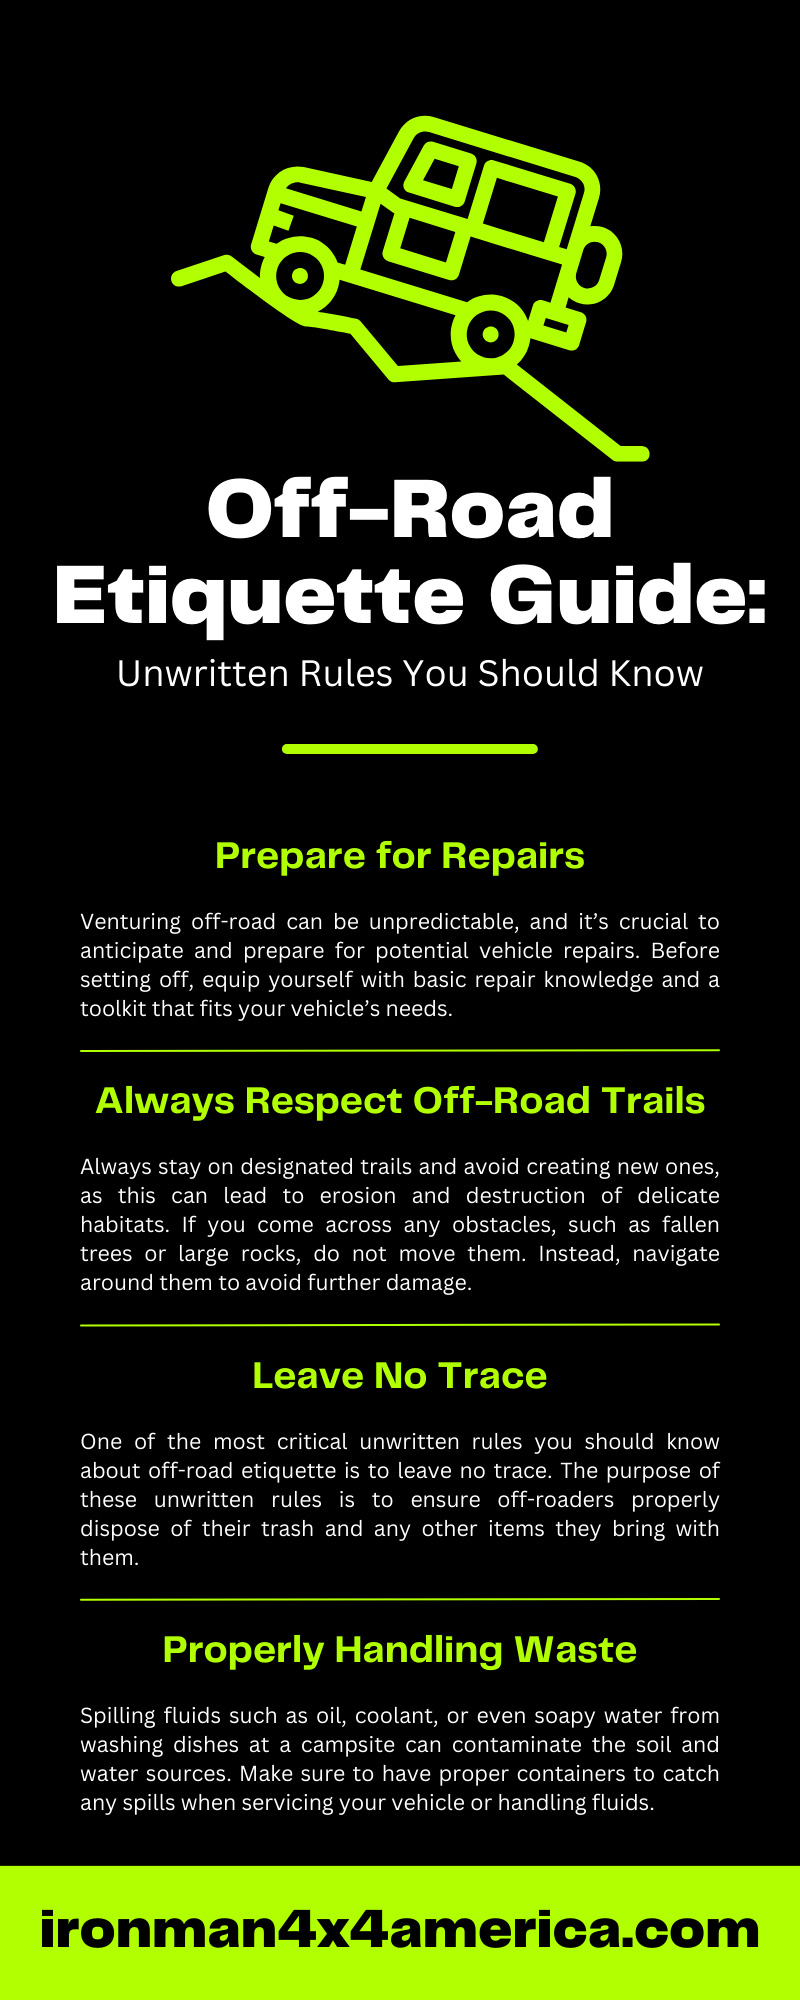 Off-Road Etiquette Guide: Unwritten Rules You Should Know